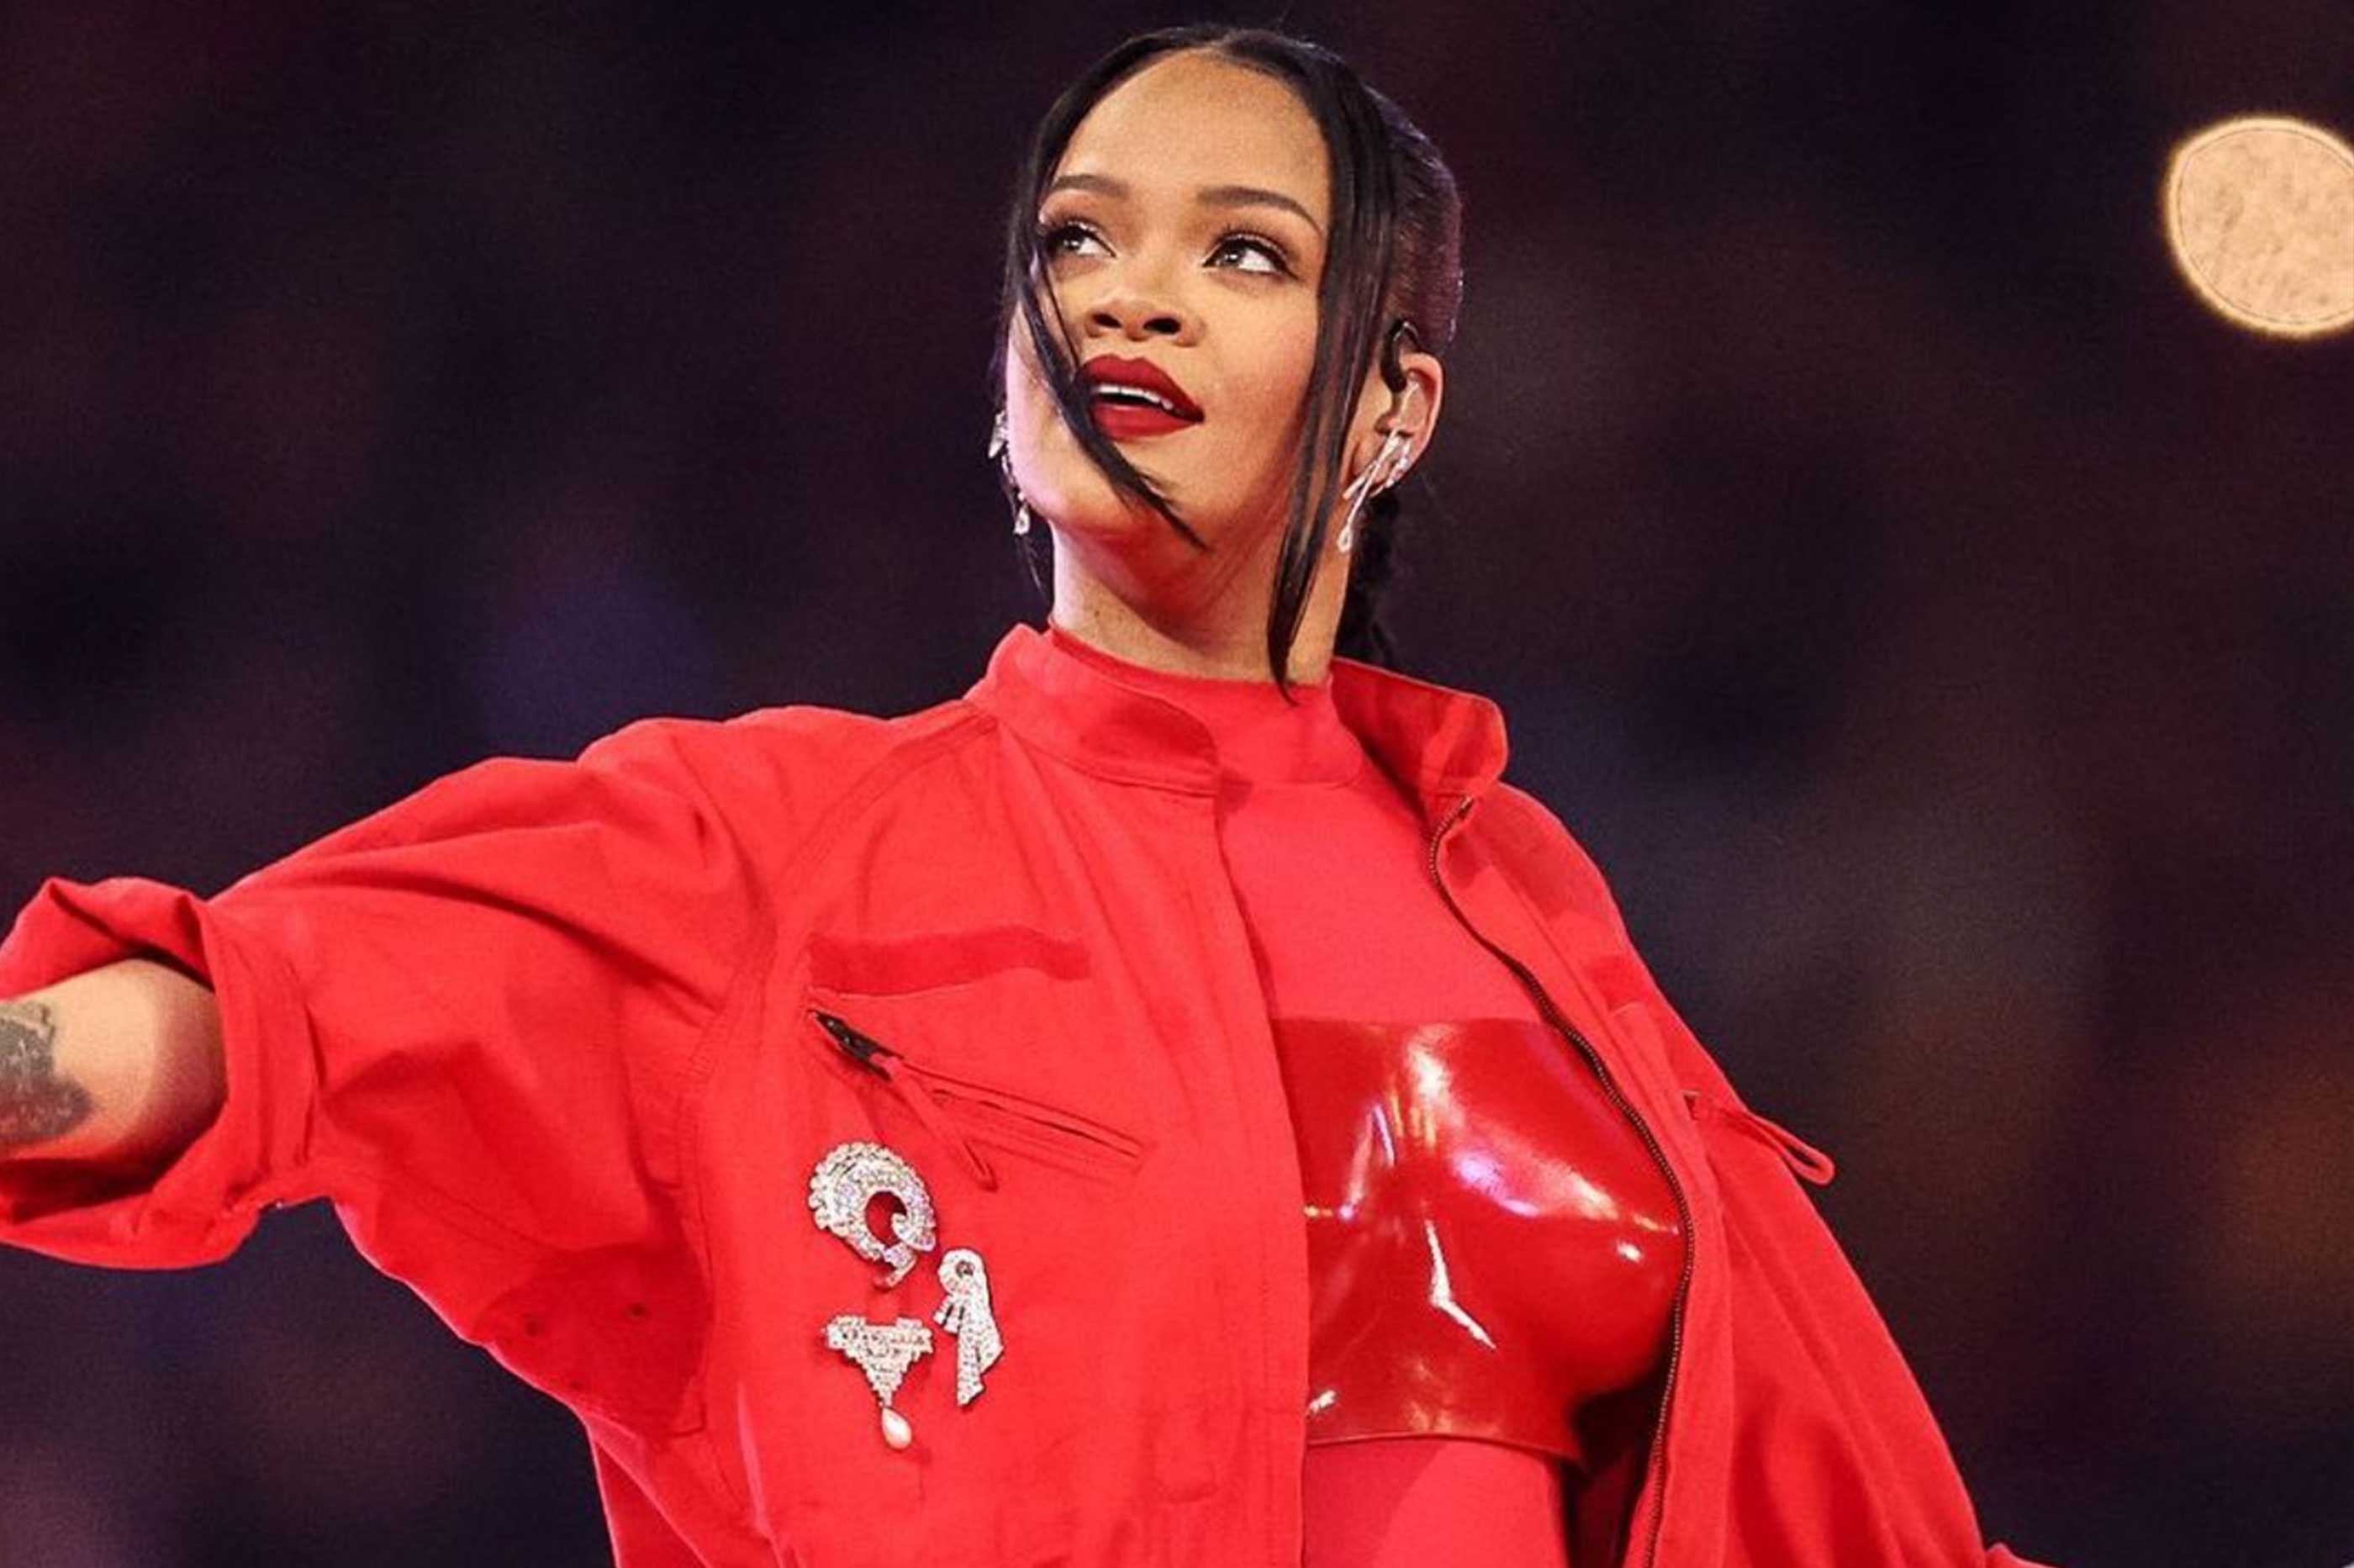 All the details of Rihanna's Super Bowl performance outfit RUSSH